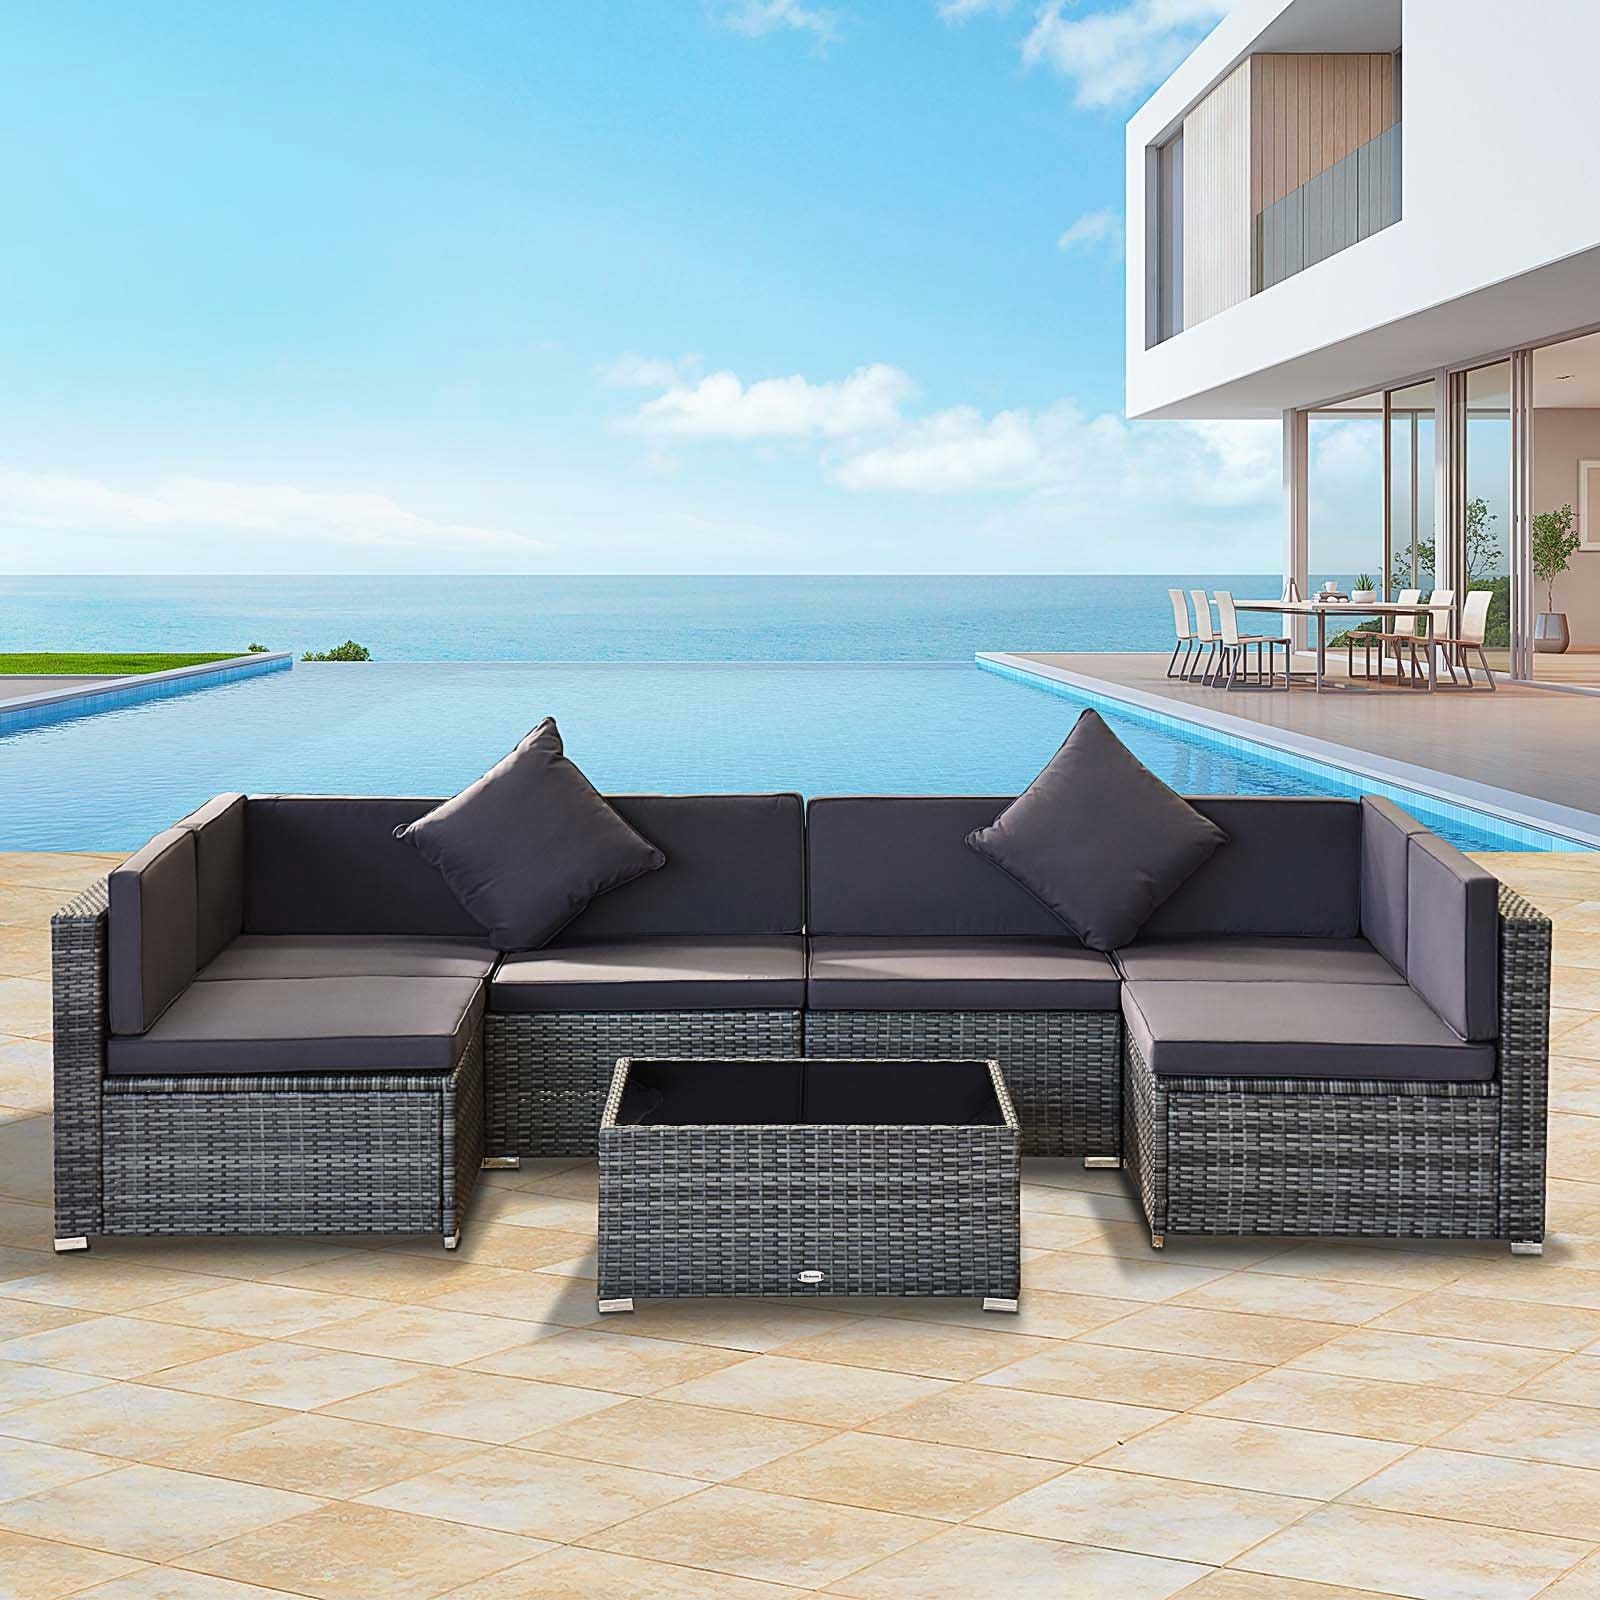 Siara 7 Piece Rattan Wicker Sectional Patio Sethavenside Home – On Sale  – – 27619016 Within 7 Piece Rattan Sectional Sofa Set (View 2 of 15)